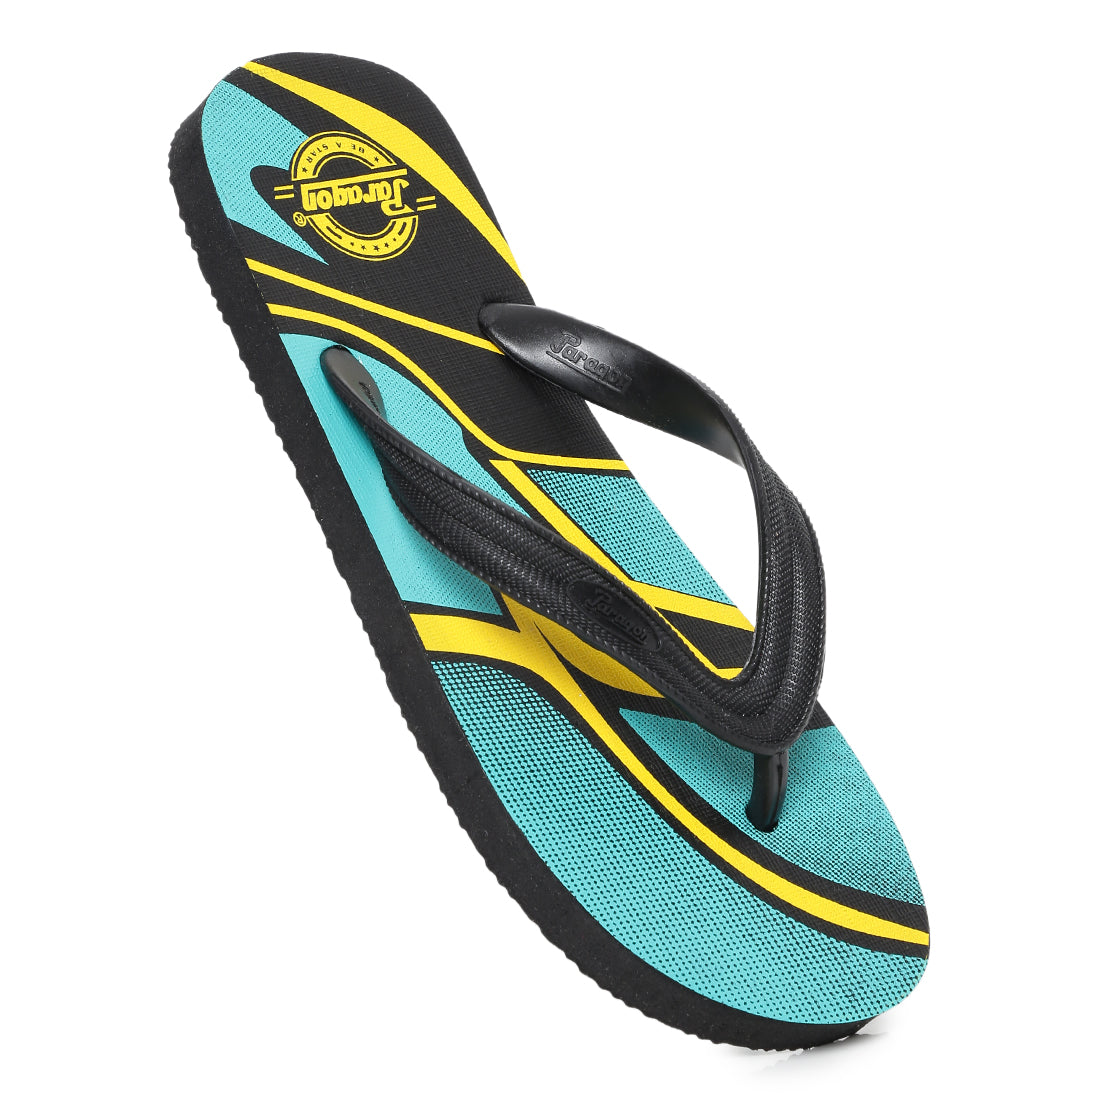 Paragon  HWK3718G Men Stylish Lightweight Flipflops | Casual &amp; Comfortable Daily-wear Slippers for Indoor &amp; Outdoor | For Everyday Use